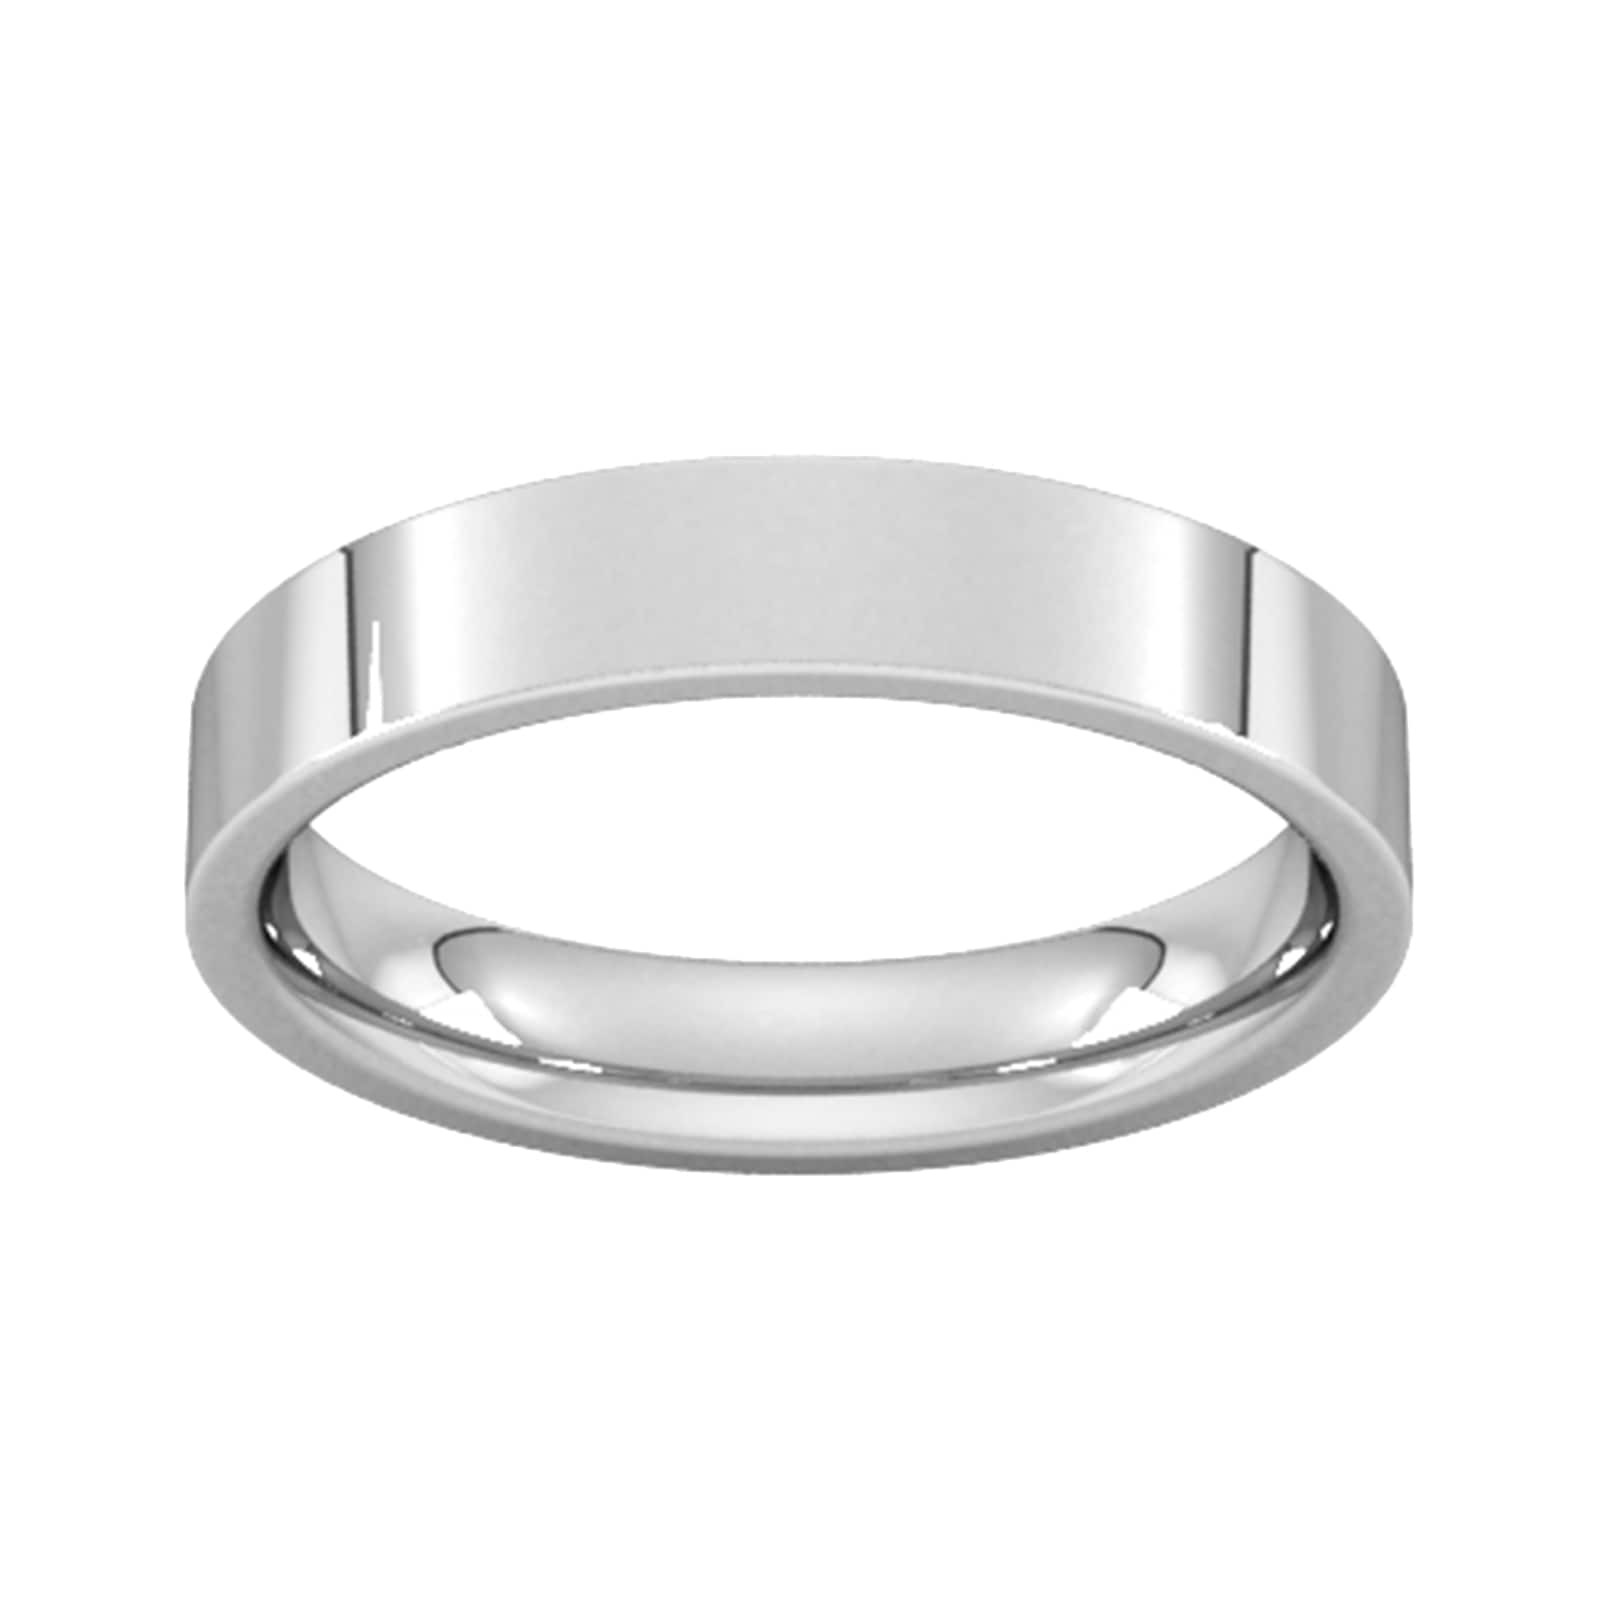 4mm Flat Court Heavy Wedding Ring In 18 Carat White Gold - Ring Size P